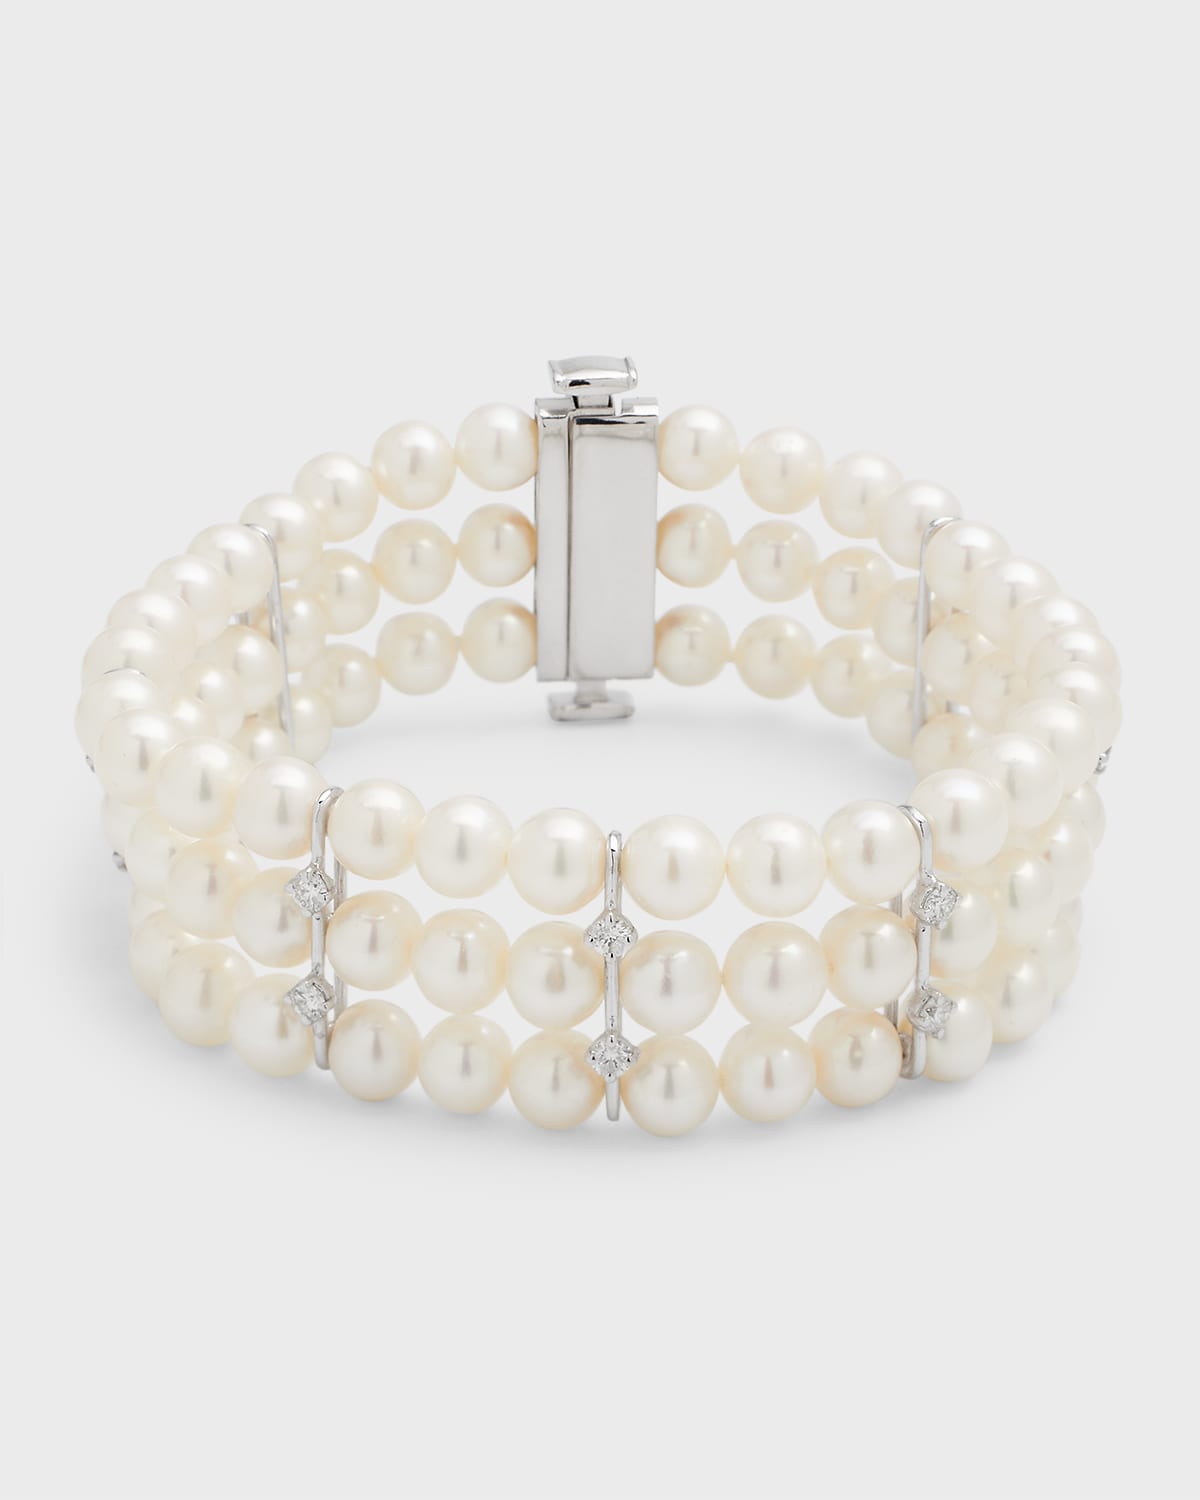 Utopia 18k White Gold 3 Row Bracelet With Diamonds And Freshwater Pearls, 6-6.5mm